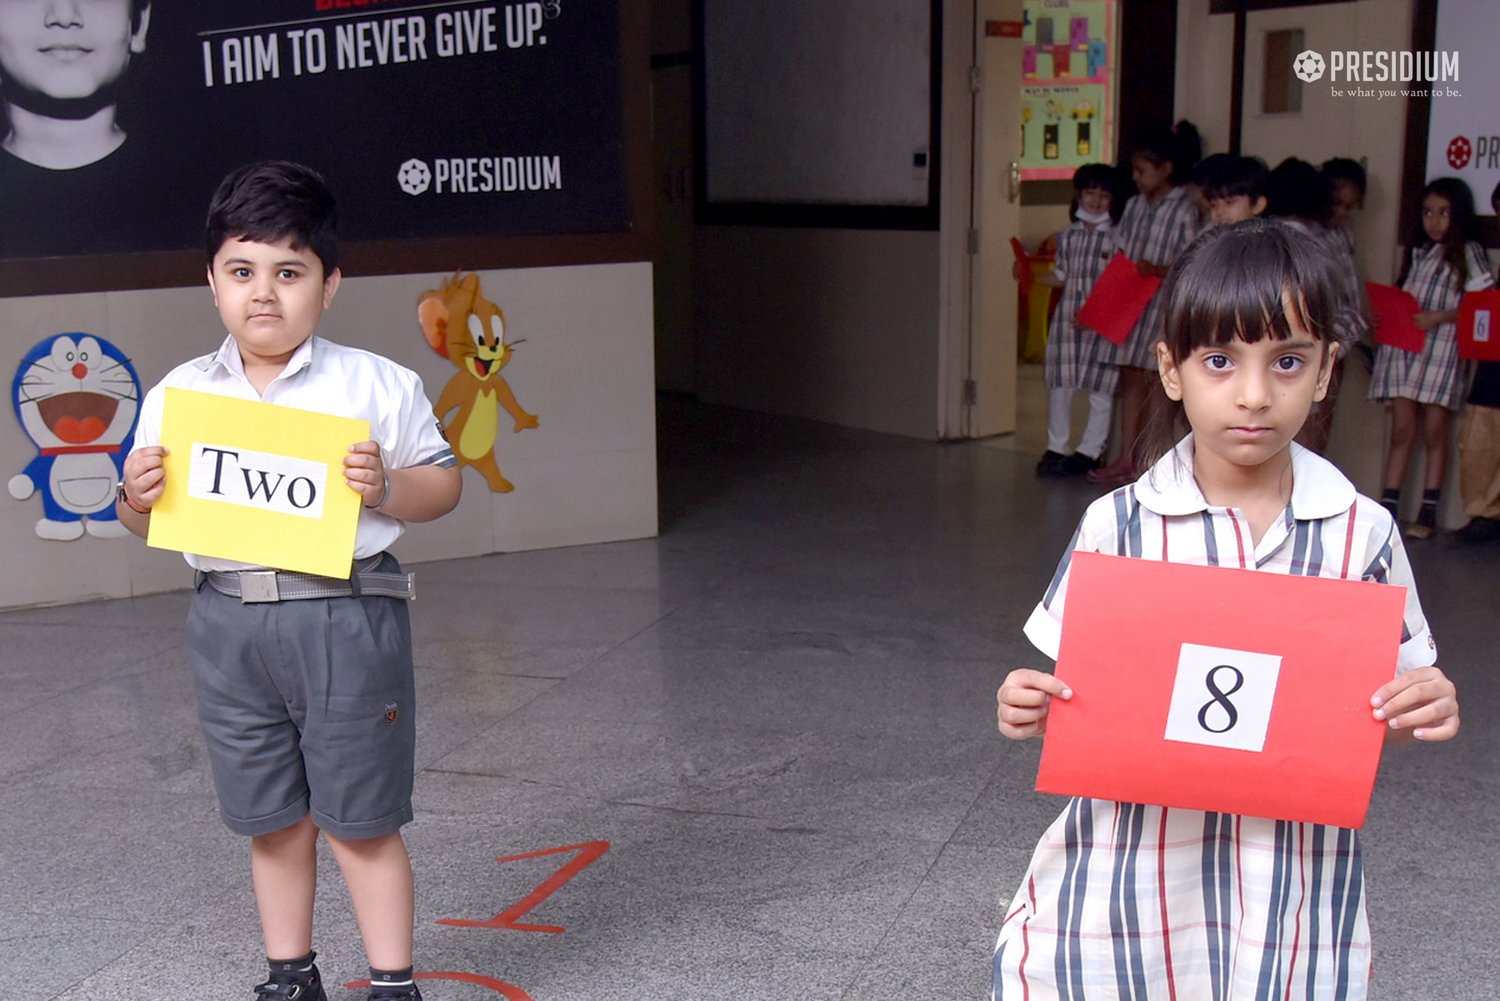 Presidium Gurgaon-57, YOUNG MINDS UNDERSTAND THE CONCEPT OF NUMBER NAMES